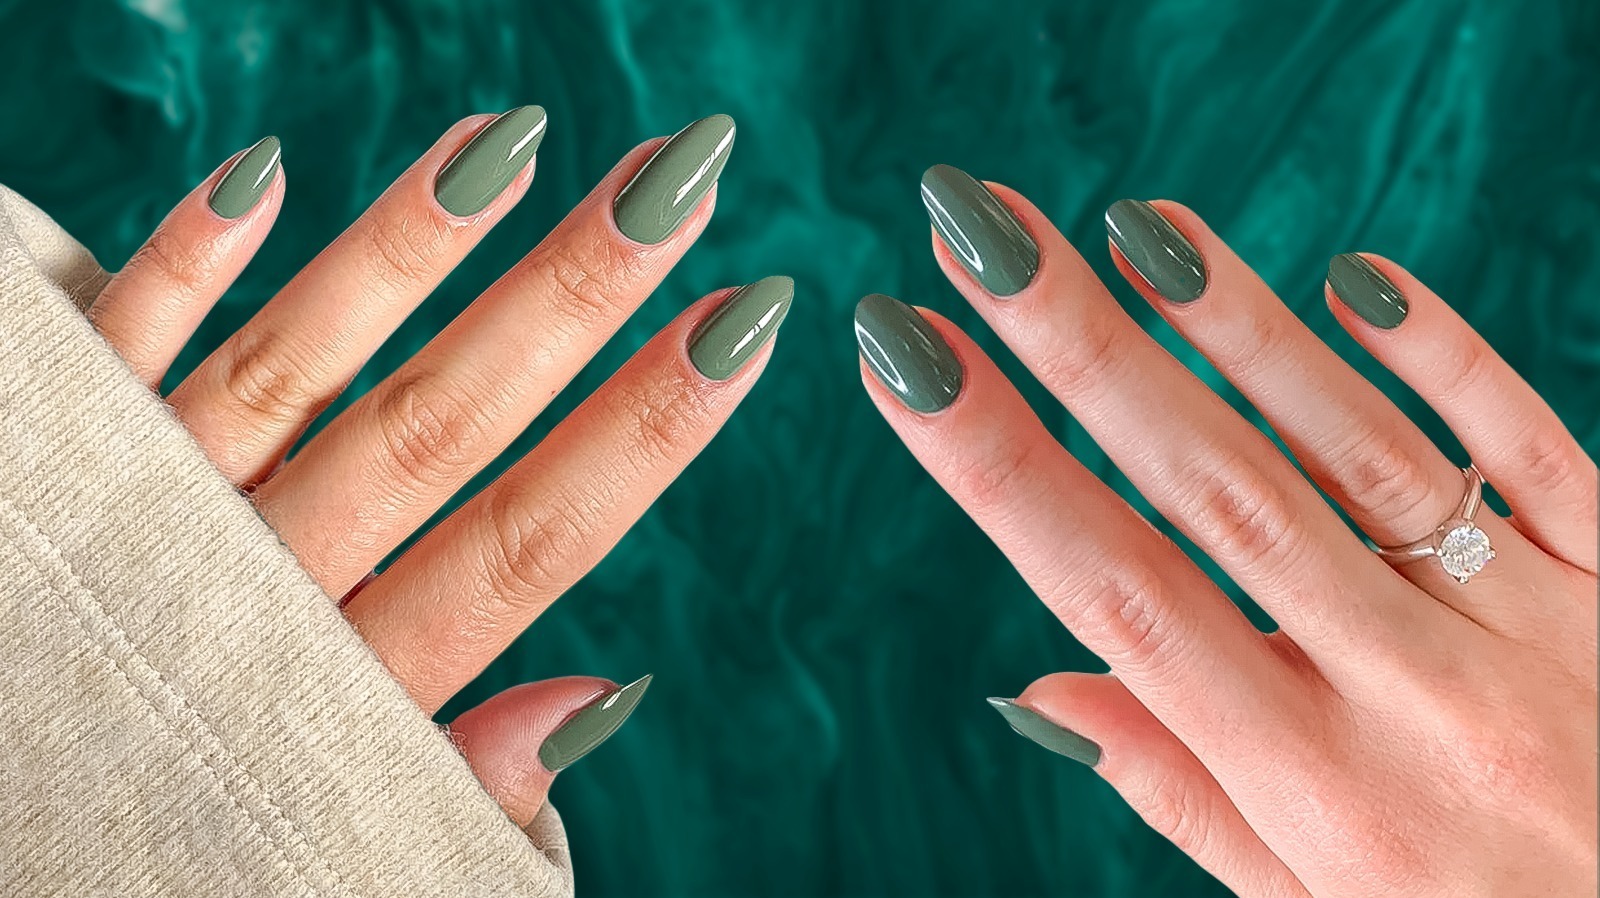 Green Chrome Slime Nails for a Vibrant Look